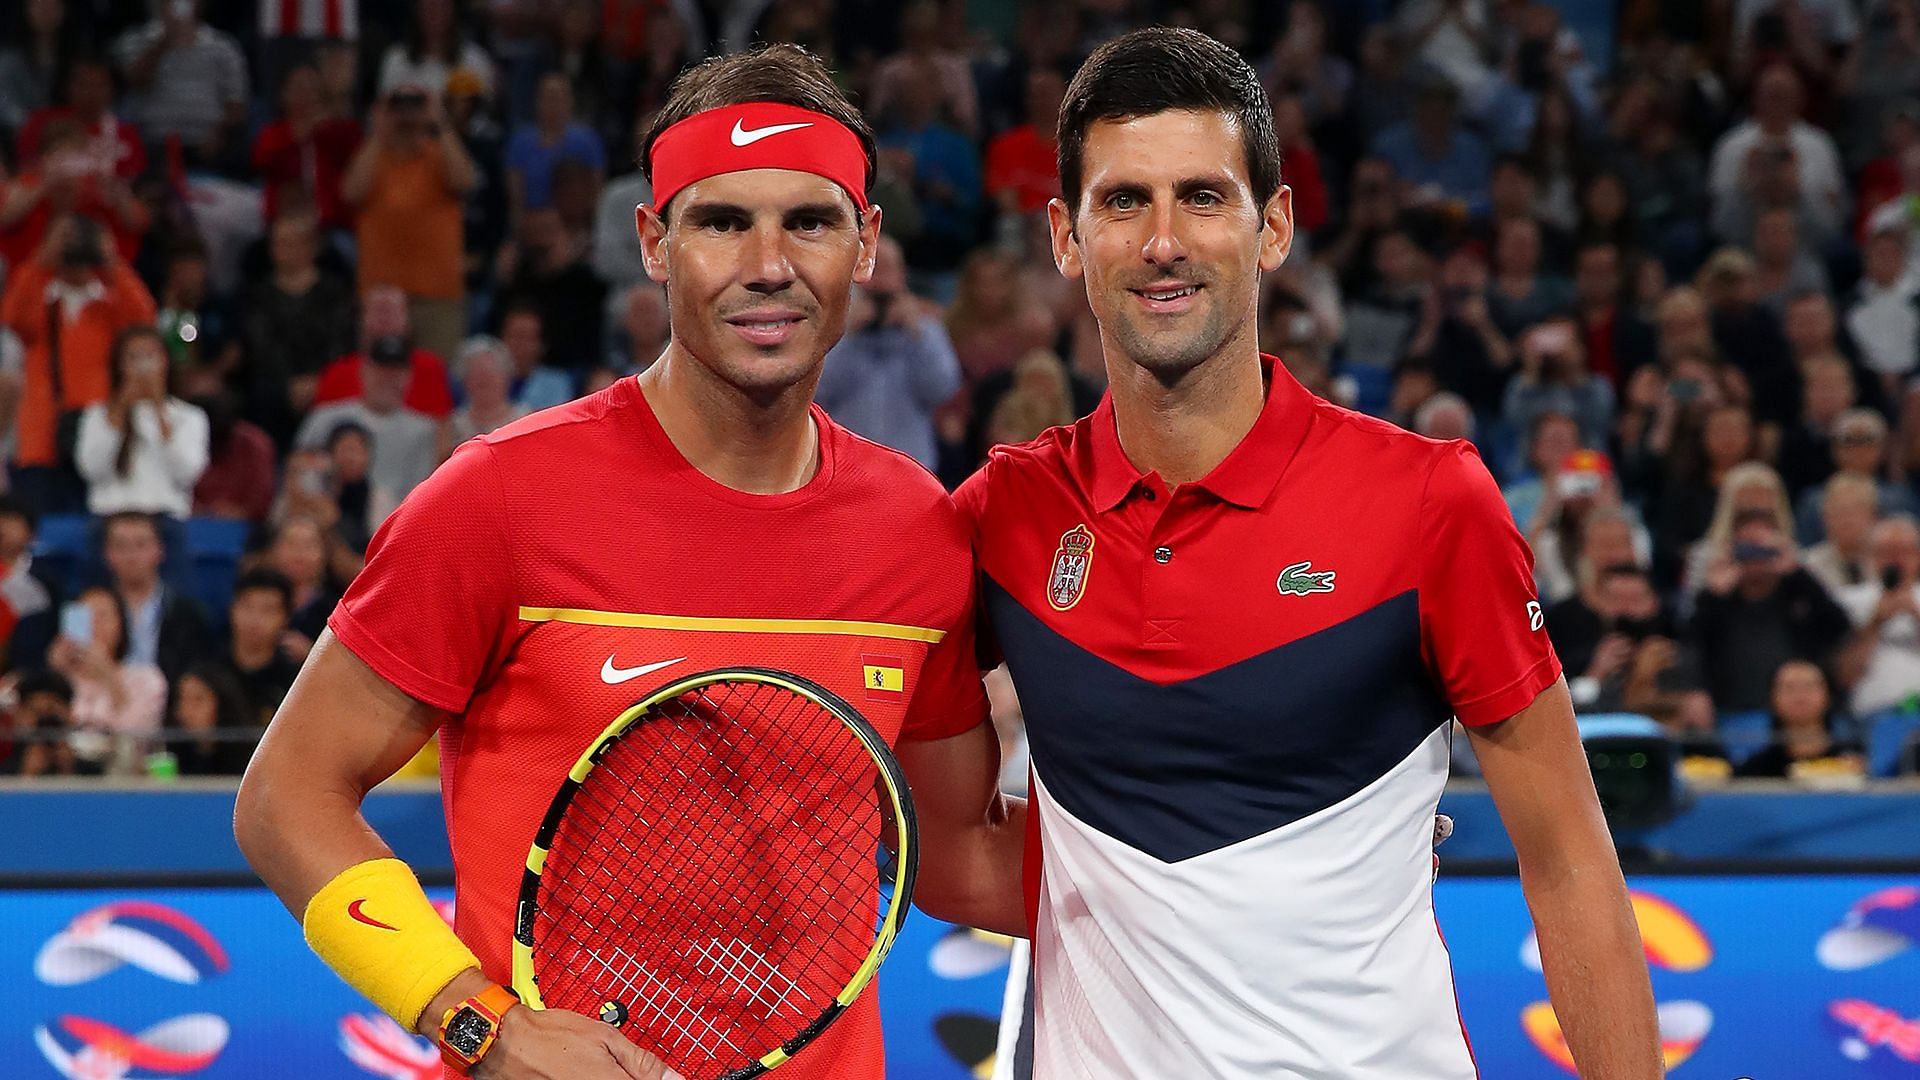 The Rafael Nadal vs Novak Djokovic rivalry in numbers: All you need to know ahead of Paris Olympics 'last dance'